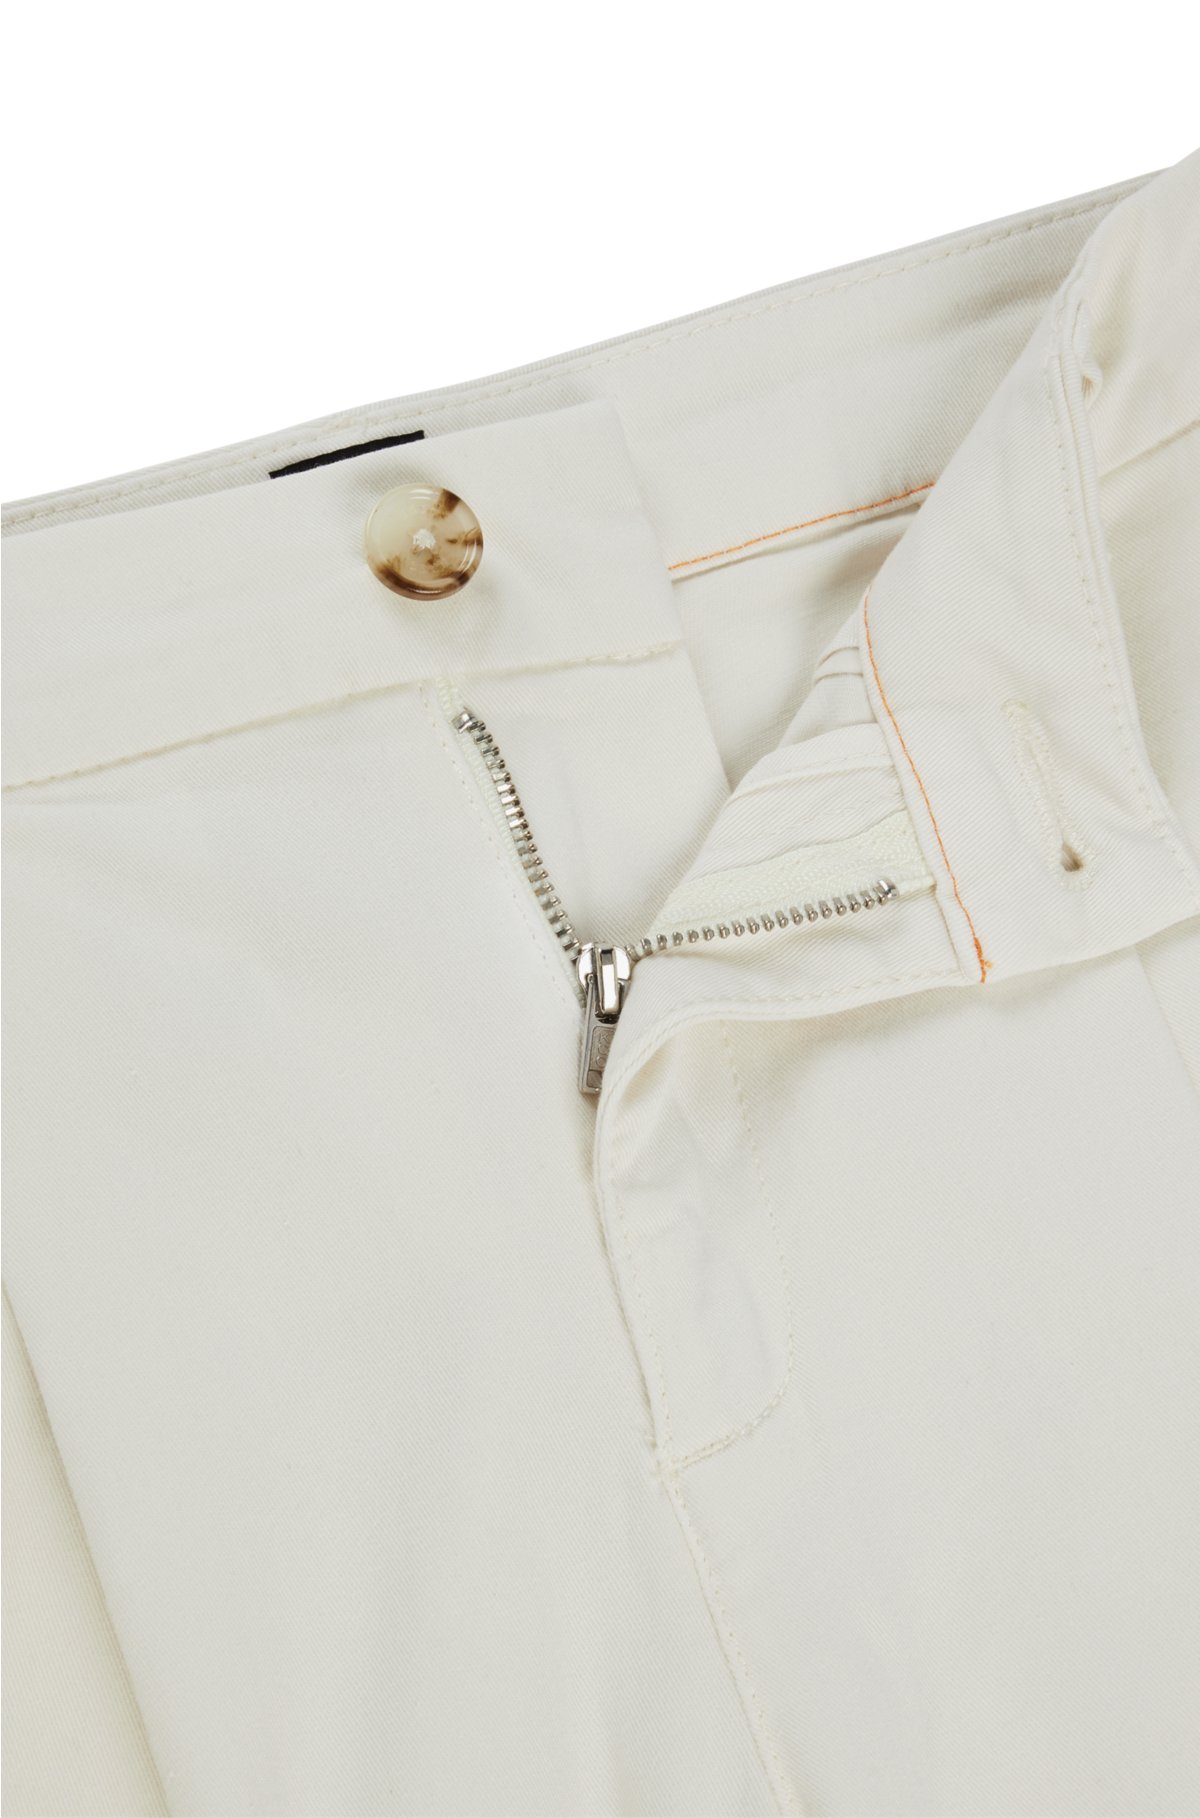 Relaxed-fit high-rise shorts in stretch cotton, Natural